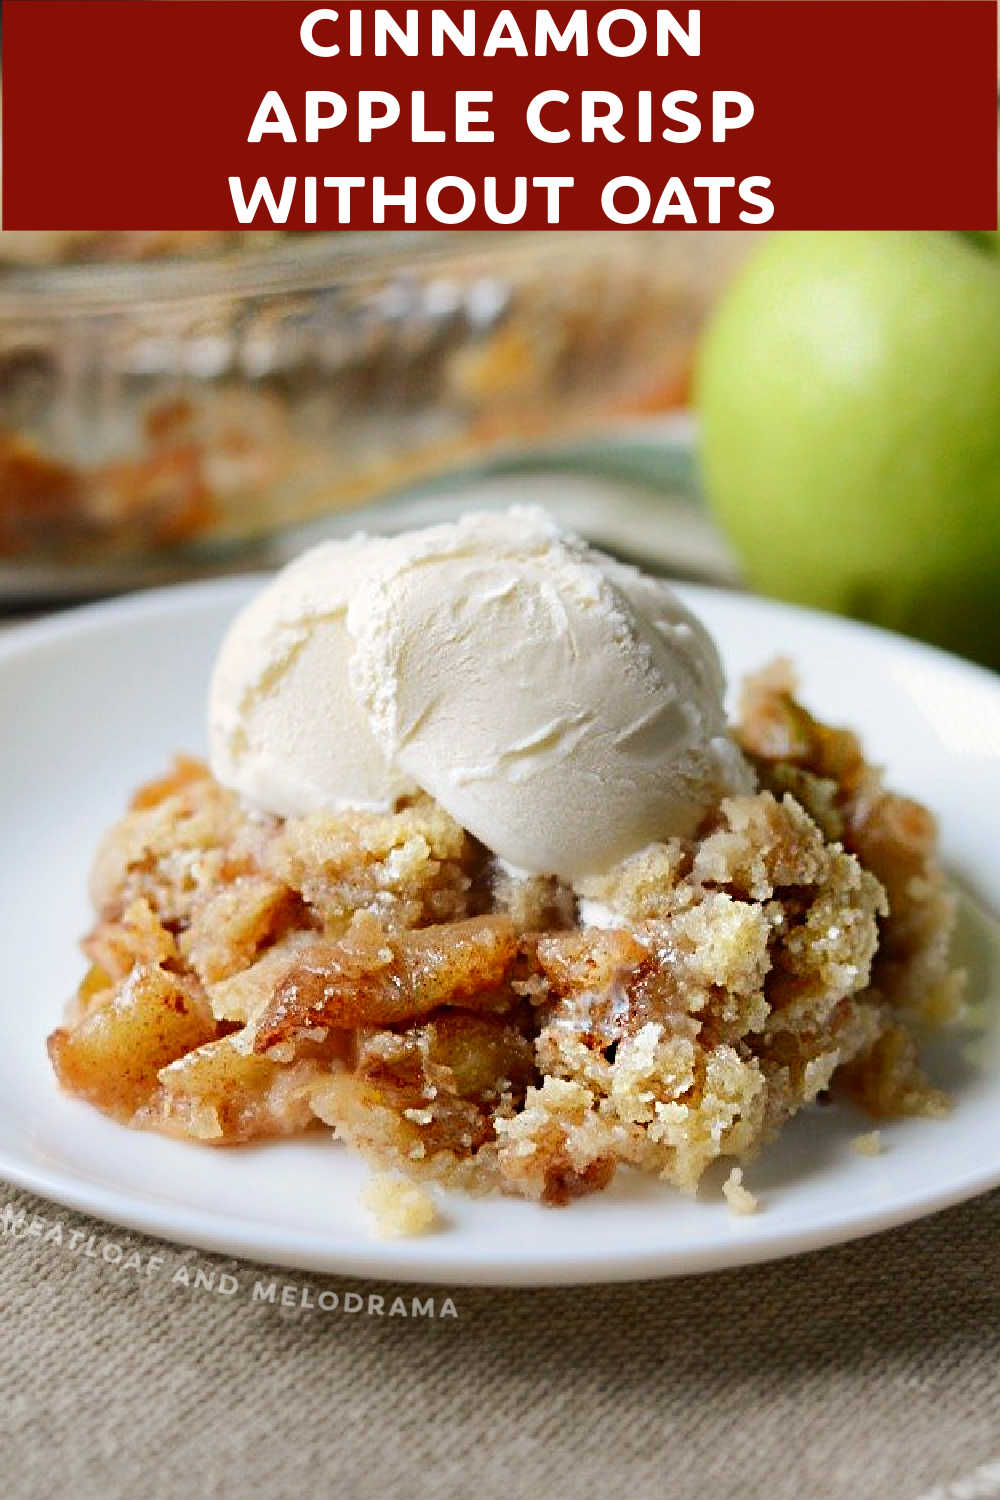 Cinnamon Apple Crisp Without Oats Meatloaf And Melodrama